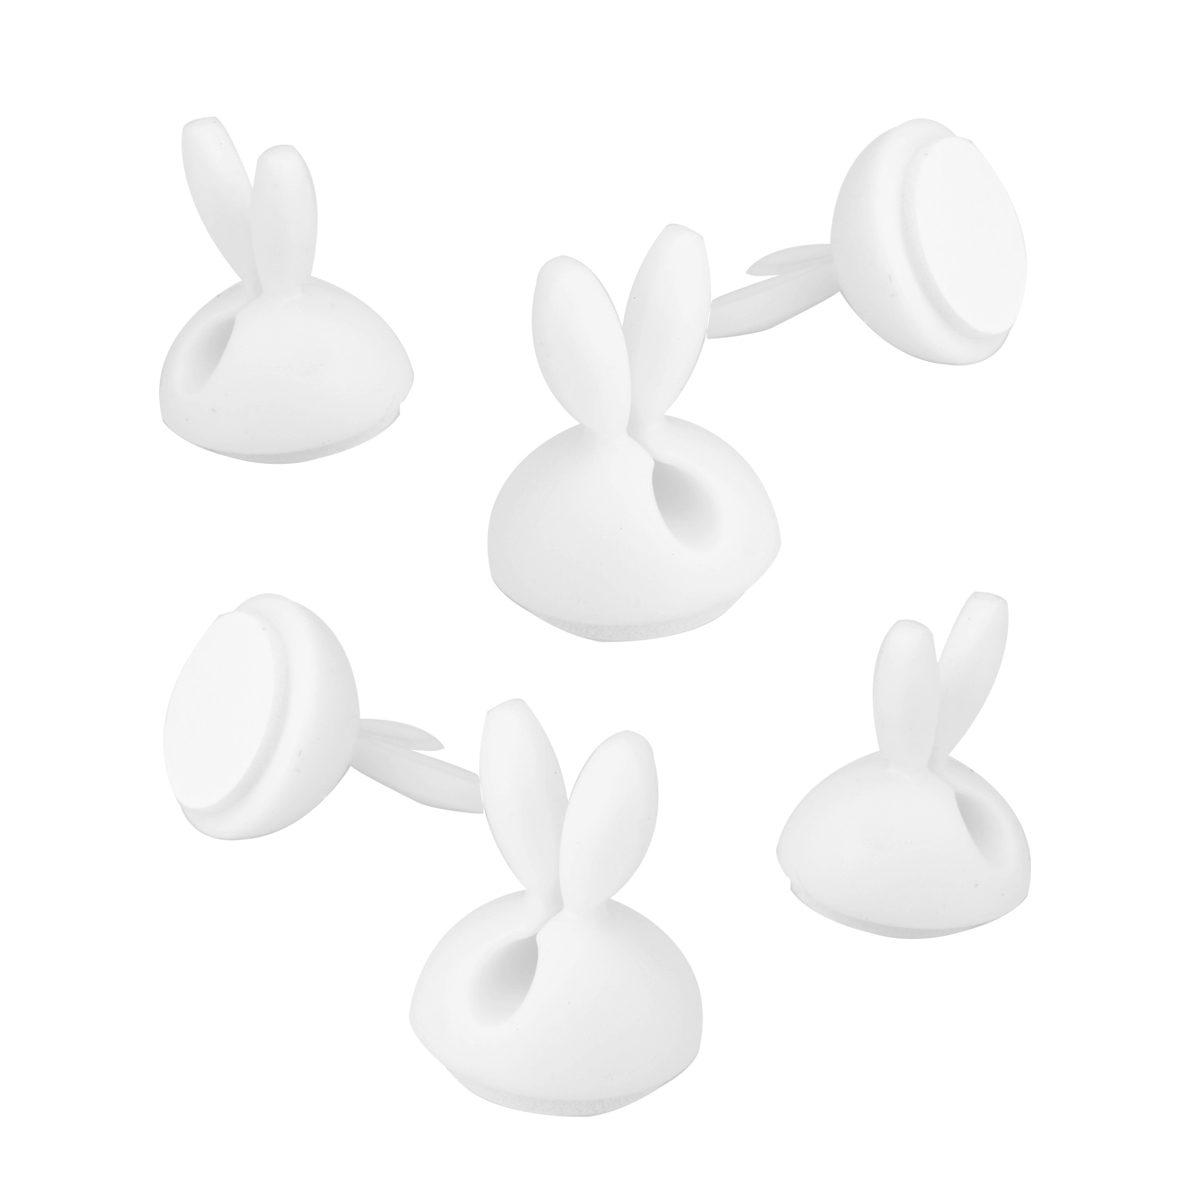 6PCS-Cute-Rabbit-Ears-Cable-Drop-Clips-Desk-Tidy-Organiser-Wire-Cord-USB-Charger-Holder-1006754